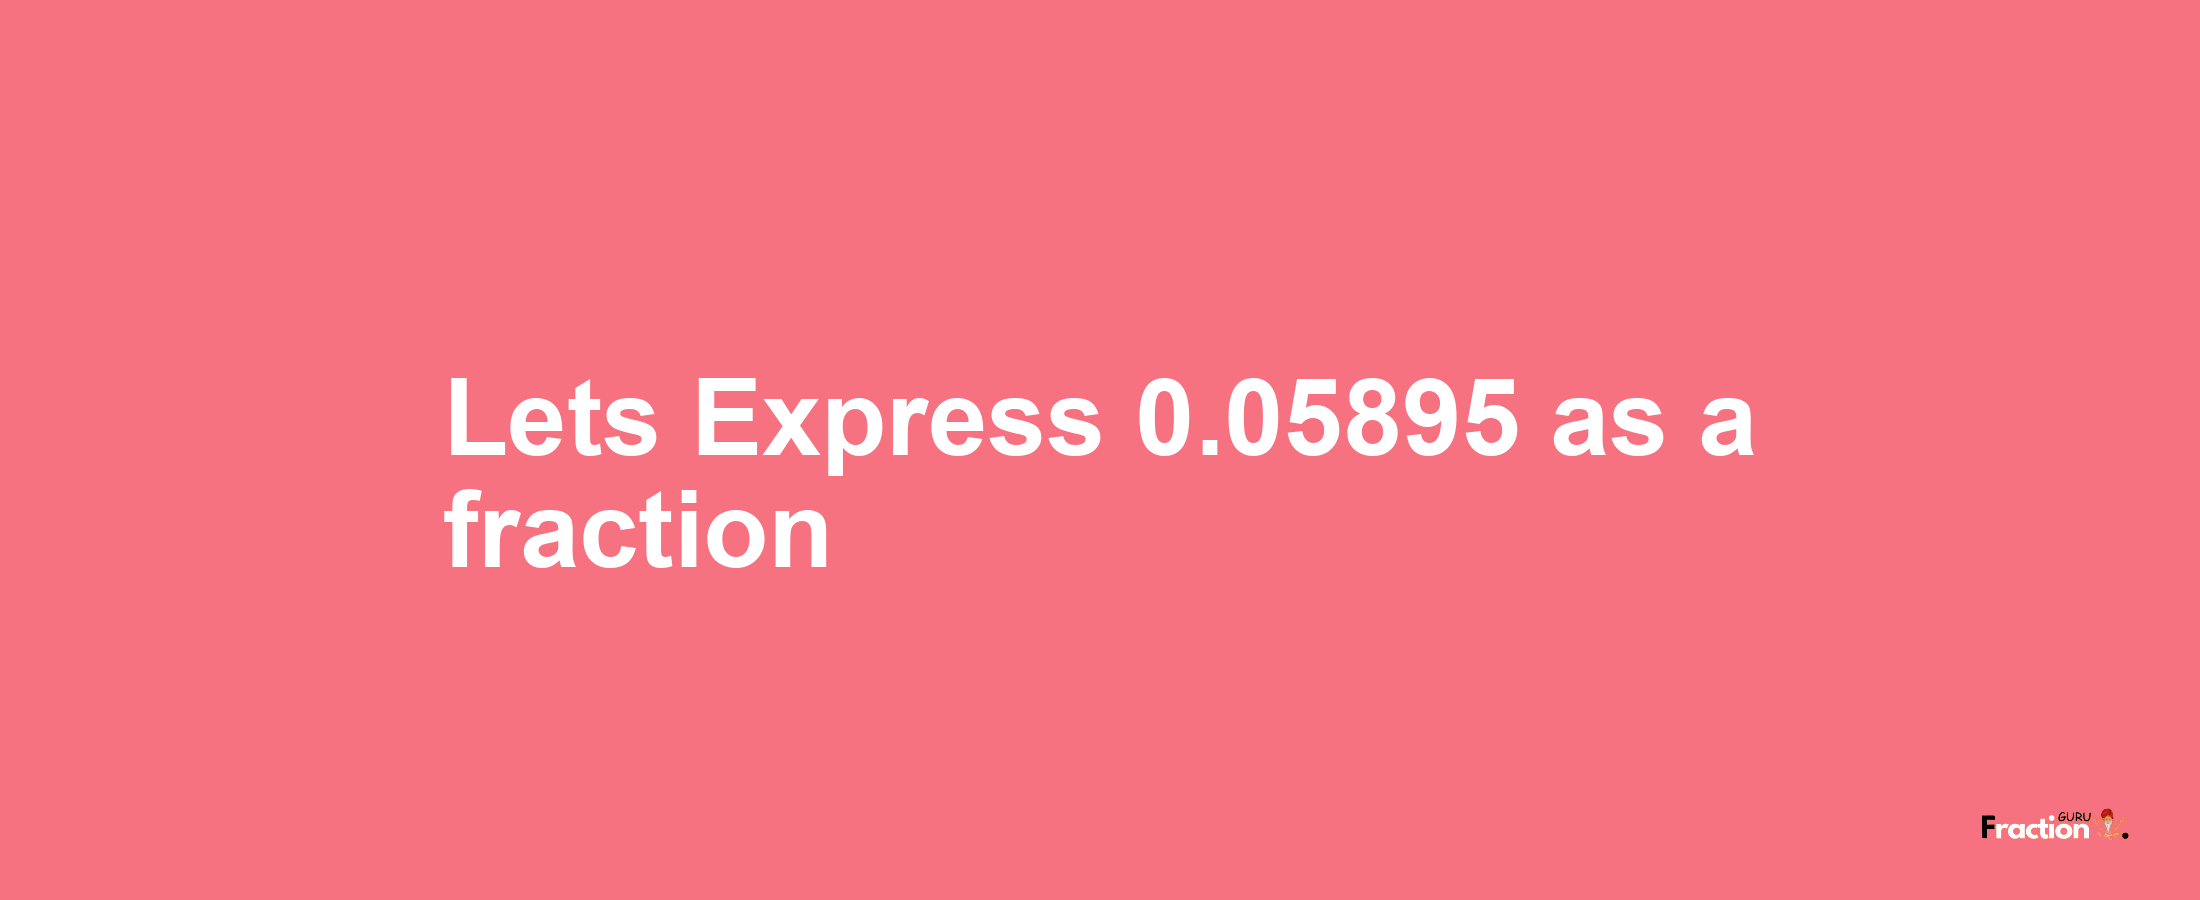 Lets Express 0.05895 as afraction